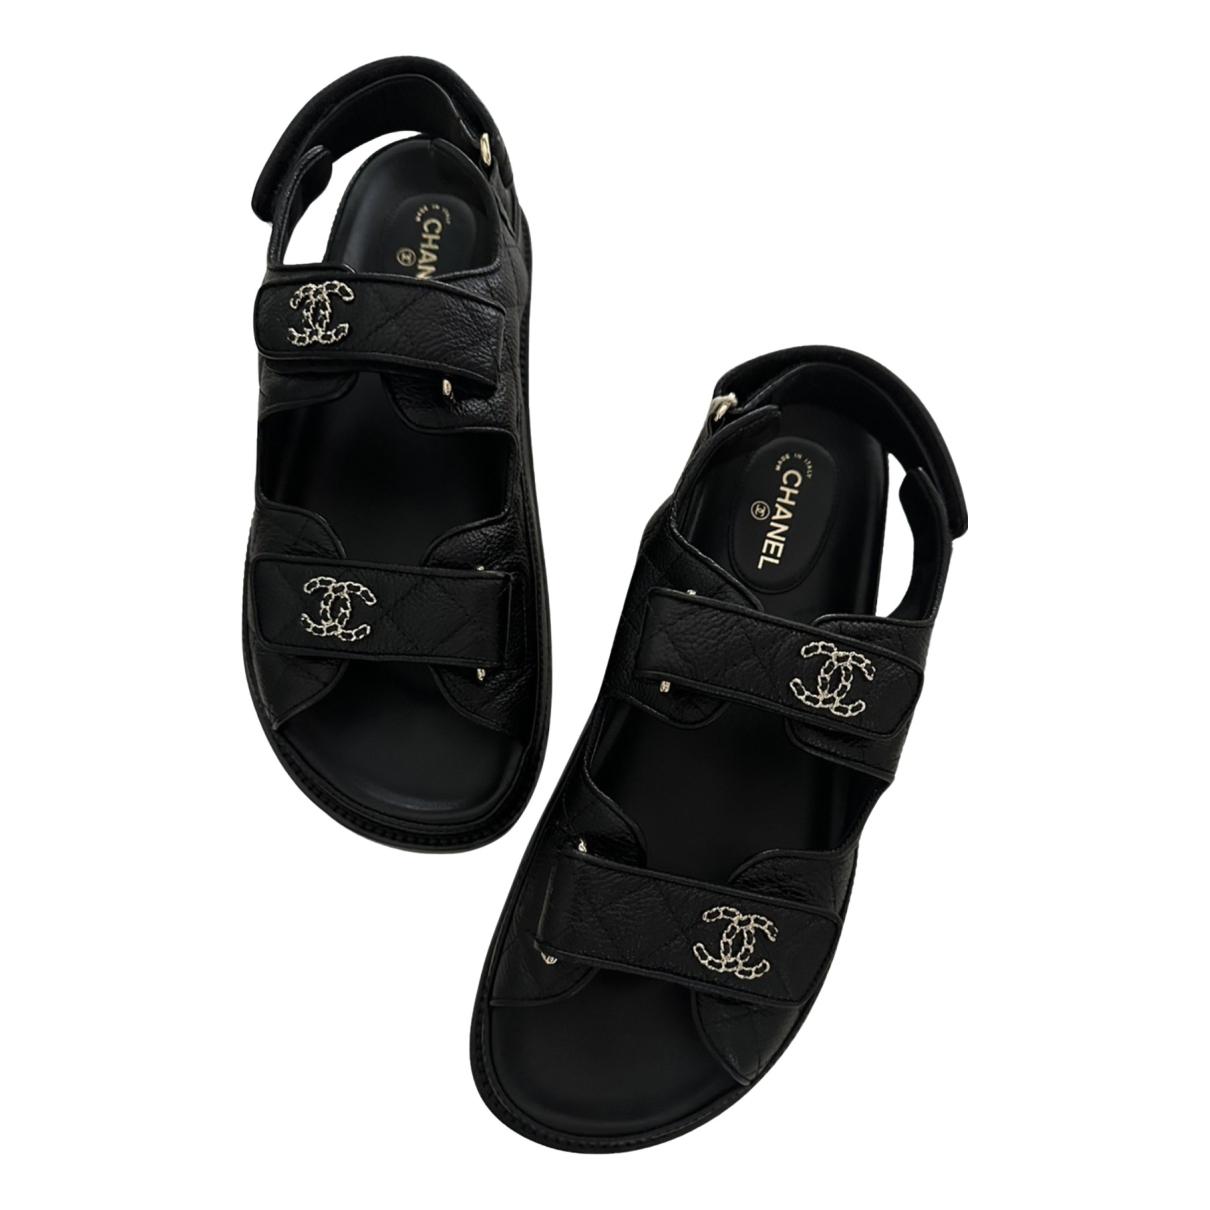 CHANEL 2020 Black Quilted Leather Dad Sandals 36.5 – Fashion Reloved